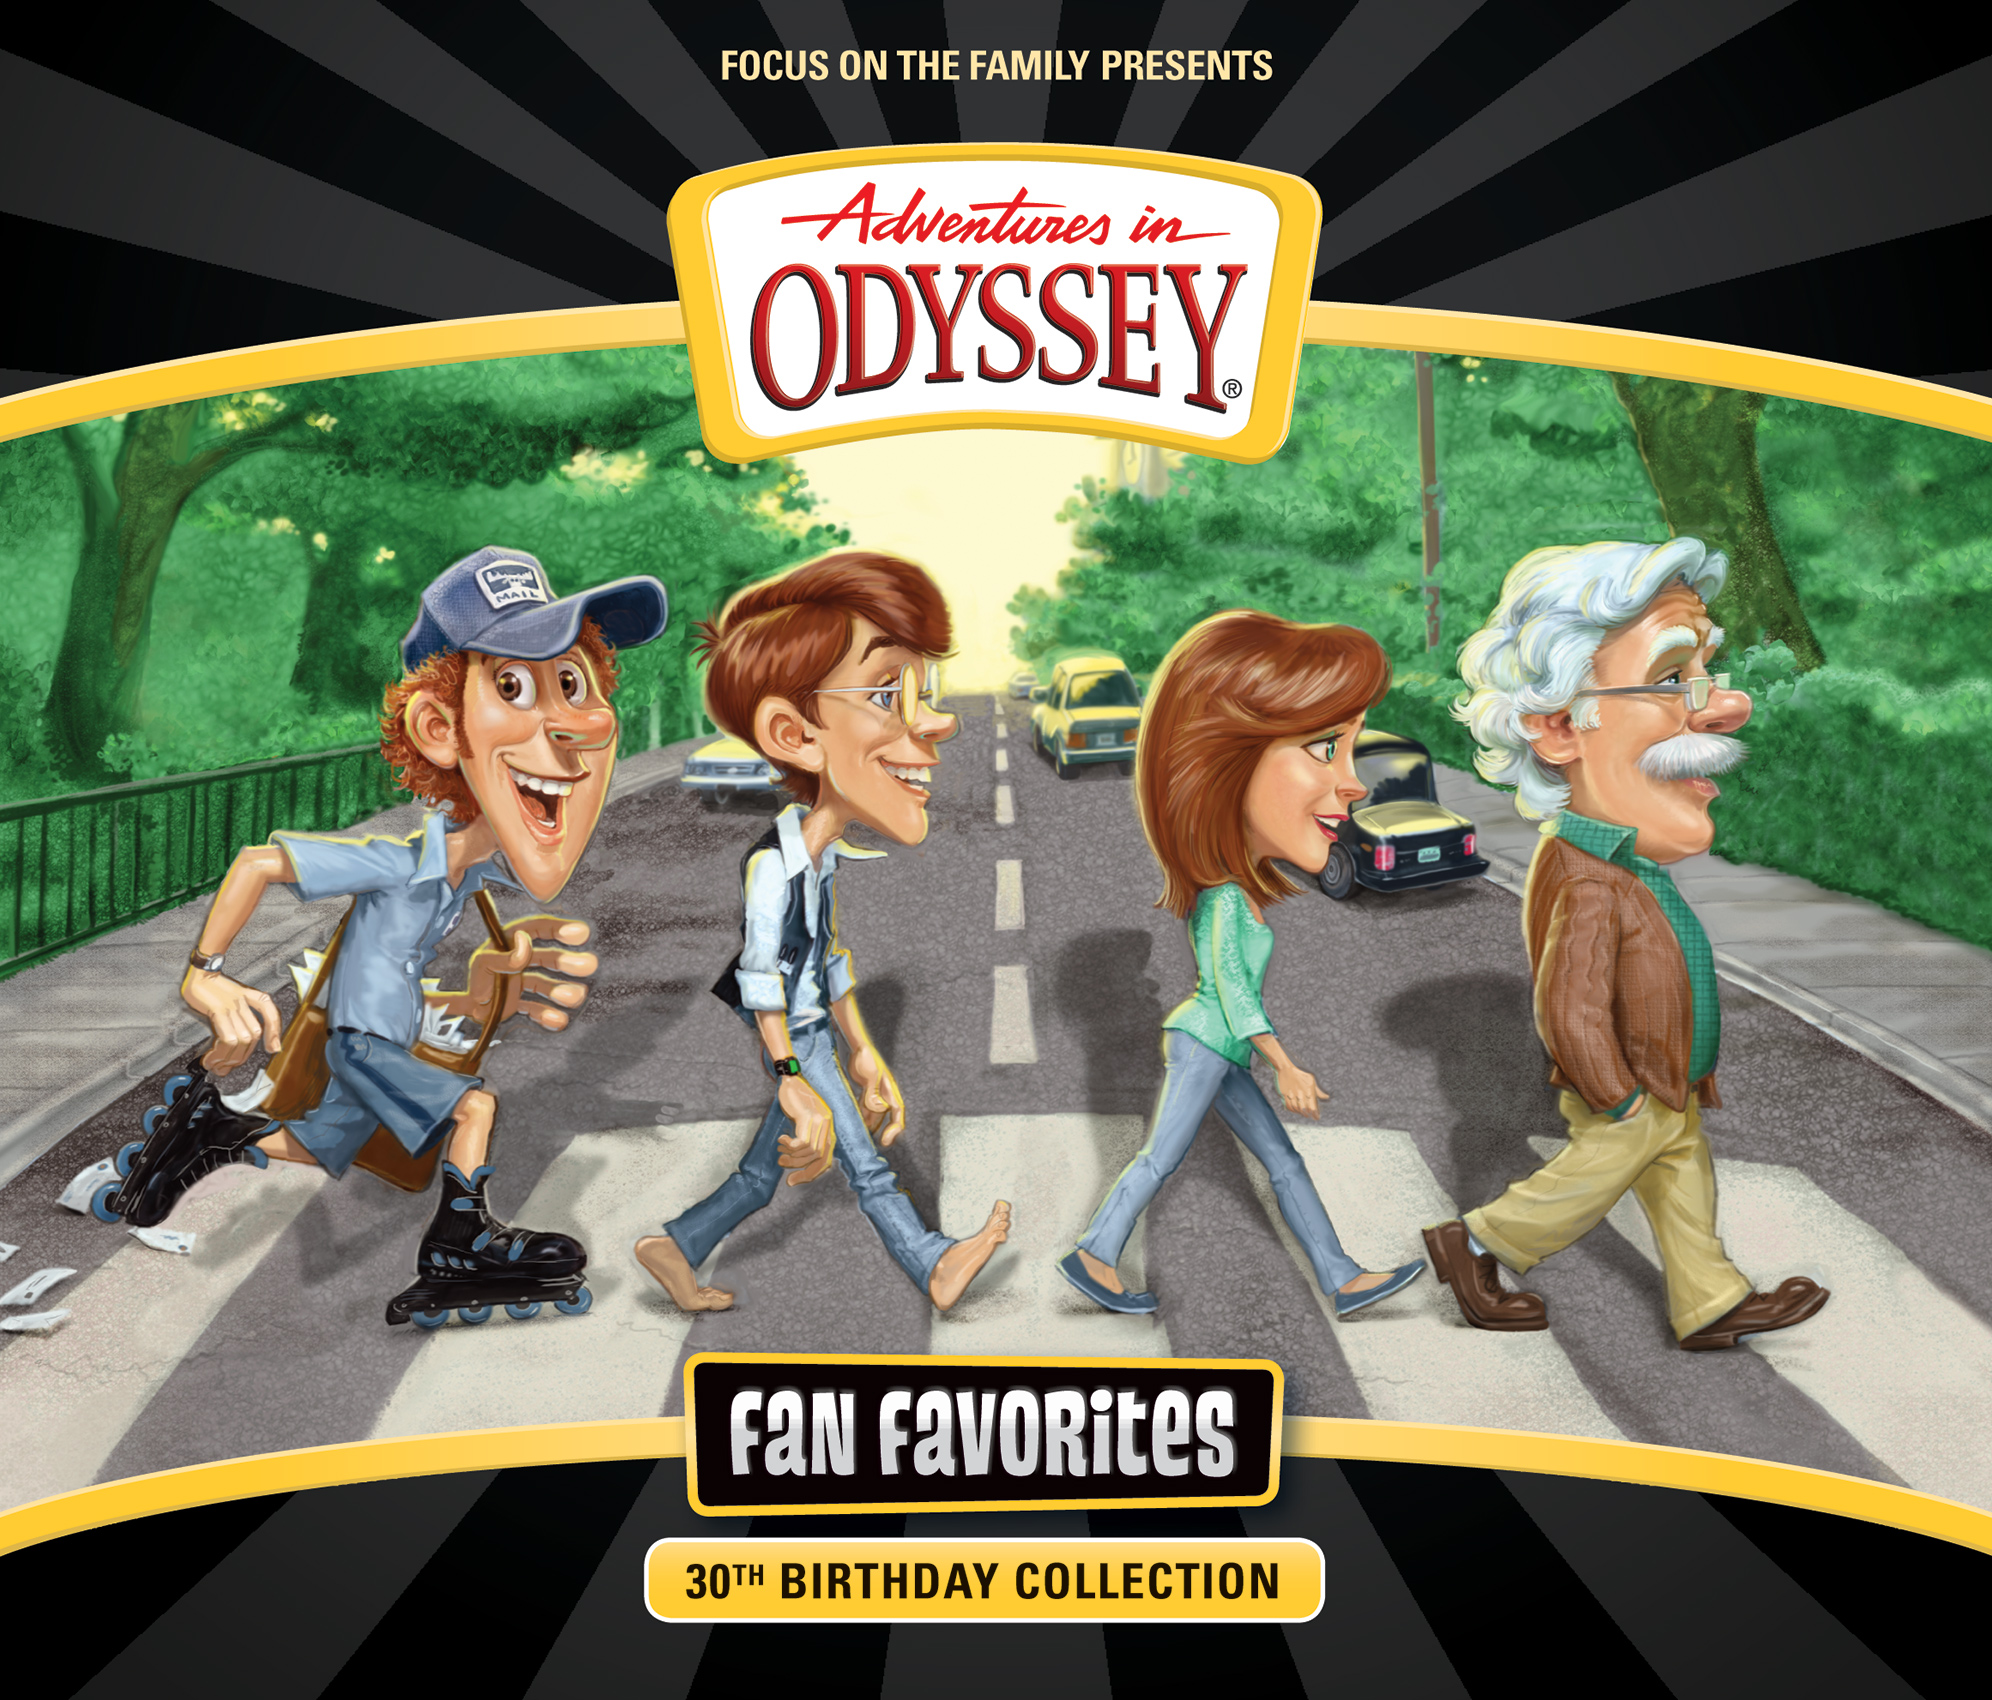 Fan favorite. Adventures in Odyssey. Adventures in Odyssey and the Treasure of the Incas.